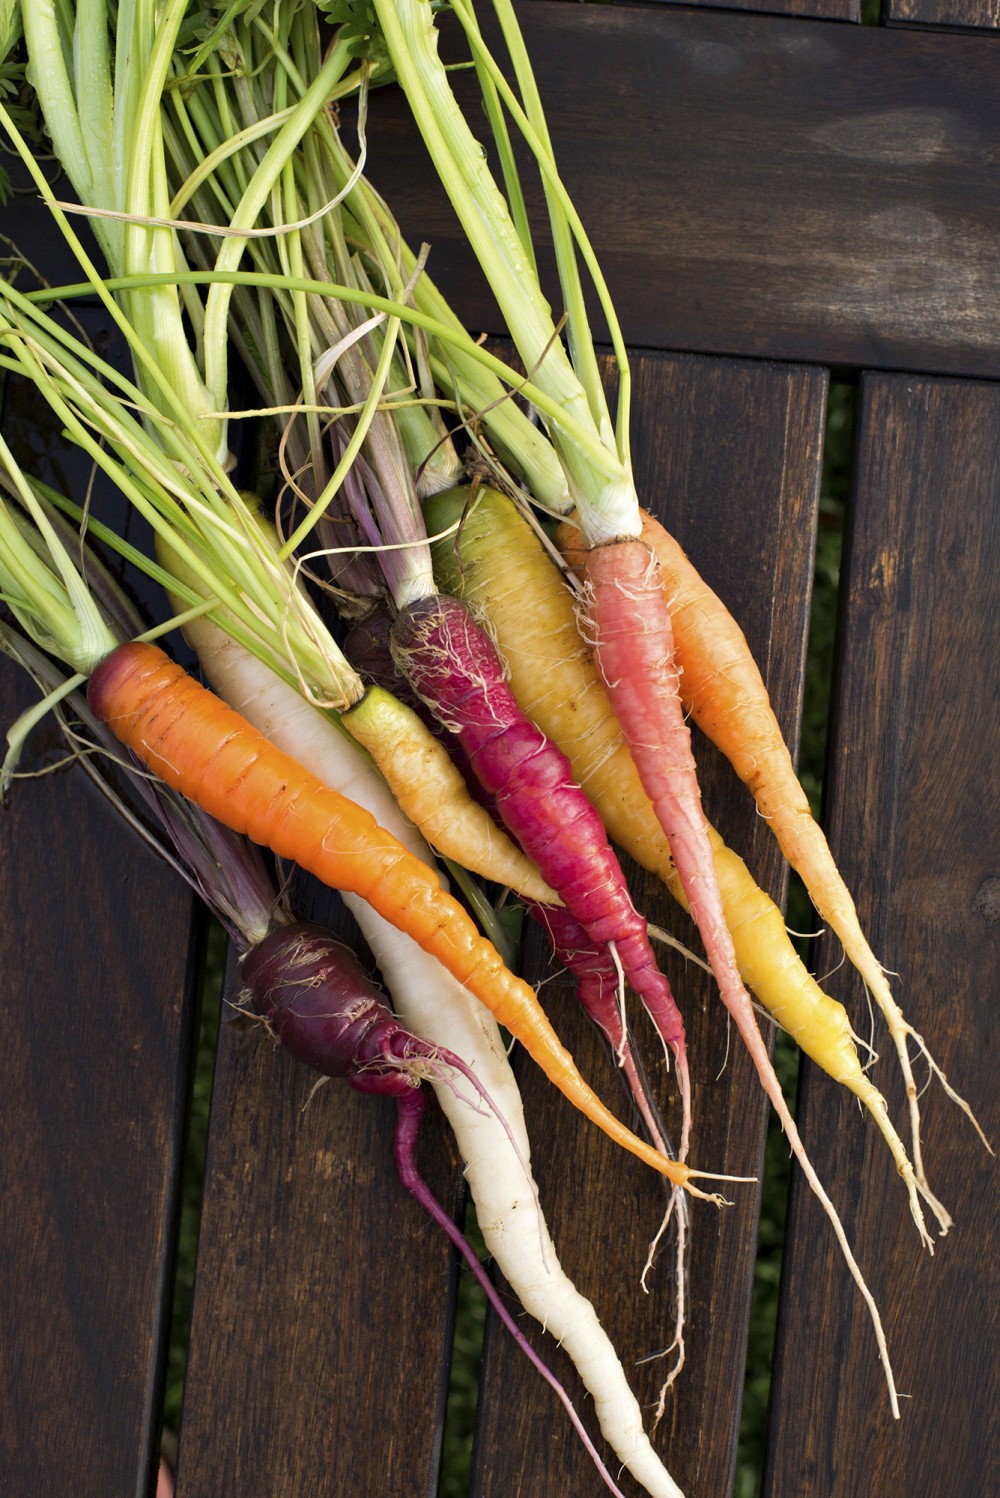 Rainbow carrots were originally developed by the USDA as an experiment to get more nutrients in food. Photo: Mark Skalny/Getty Images/iStockphoto